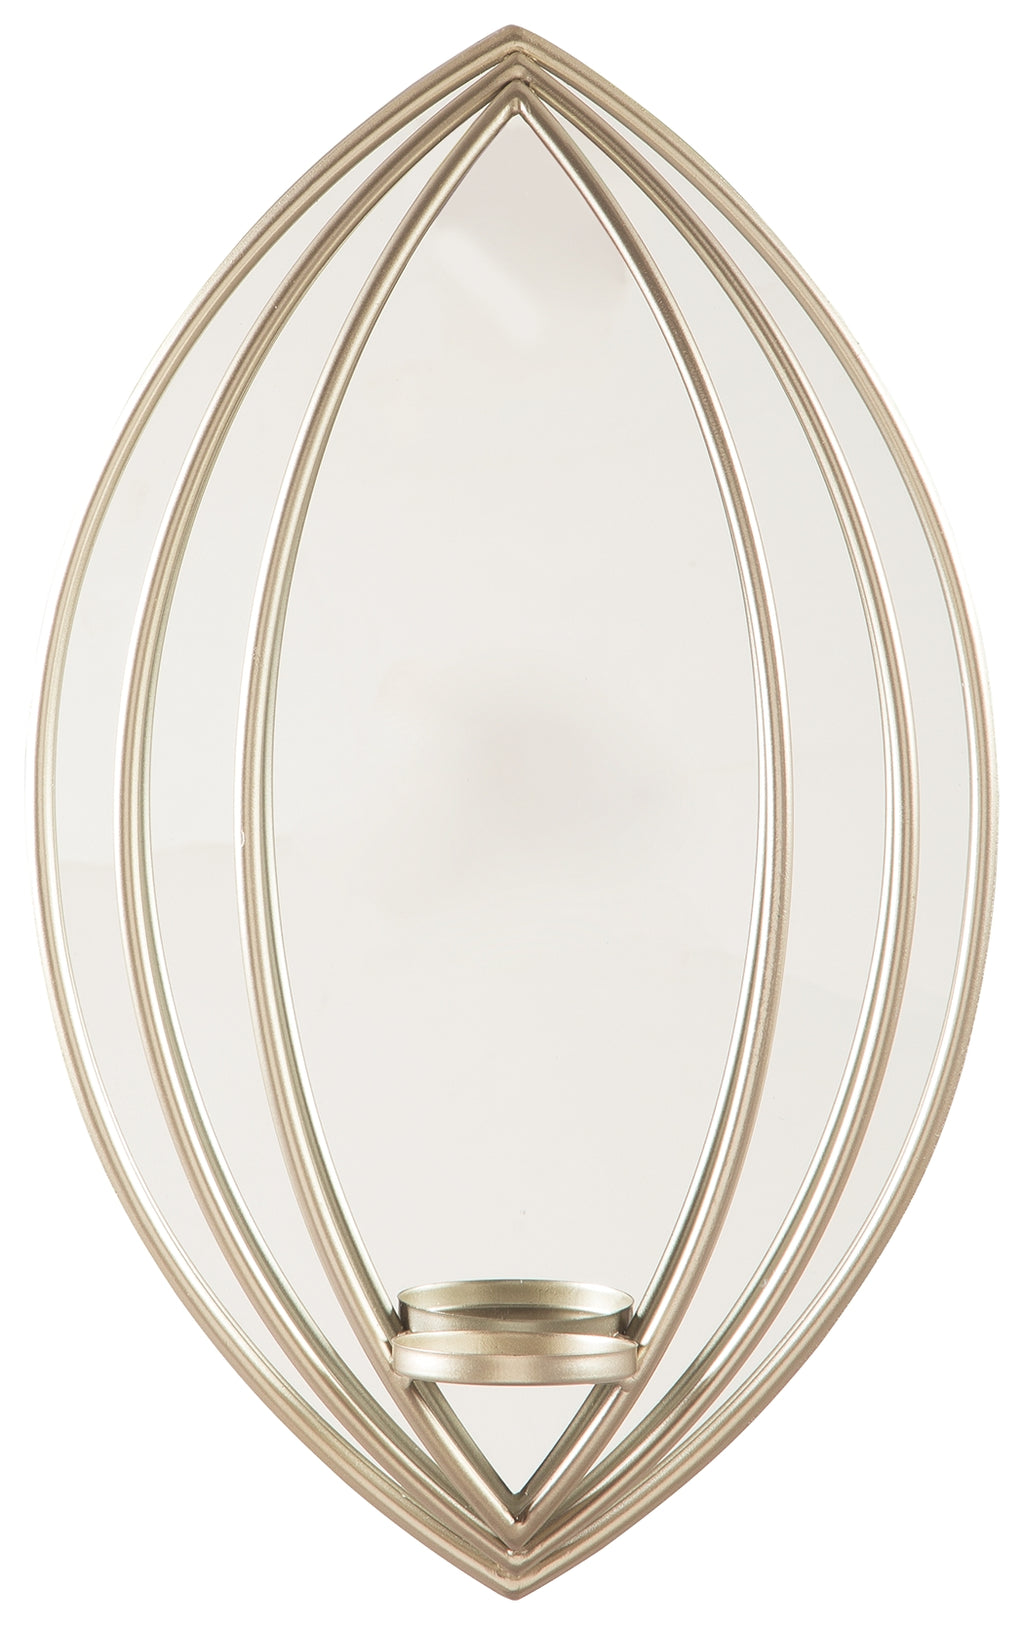 Donnica A8010154 Silver Finish Wall Sconce